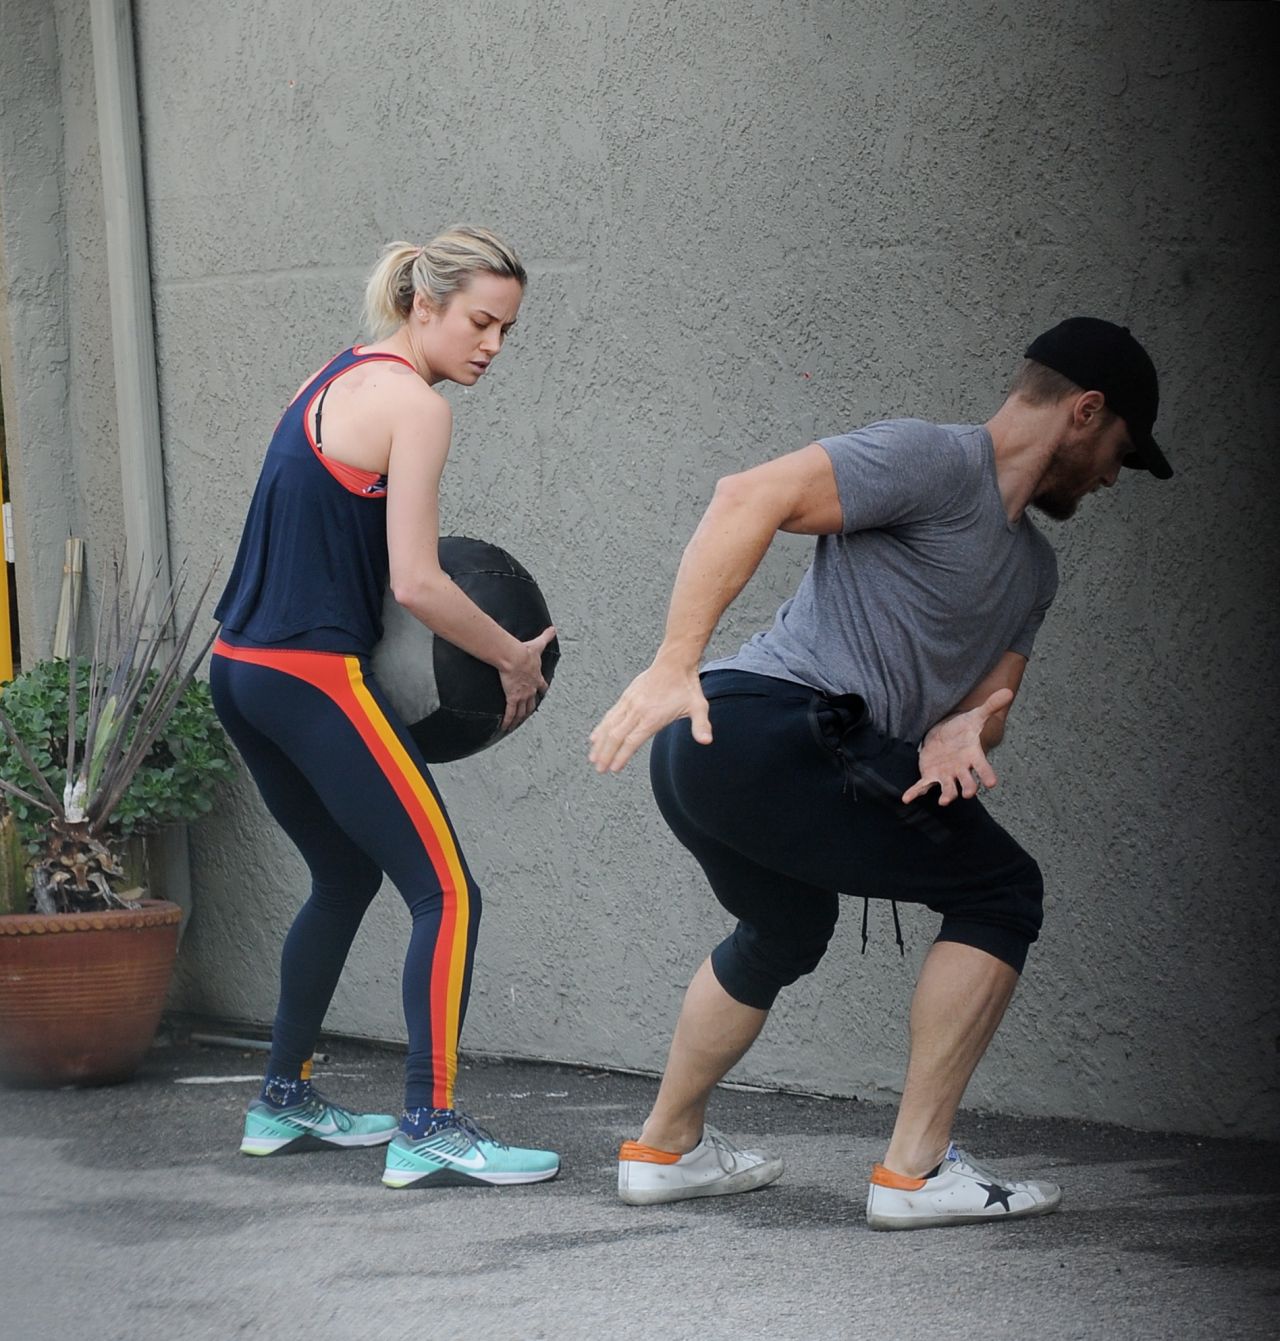 brie-larson-works-up-a-sweat-at-the-gym-in-la-january-2019-8.jpg